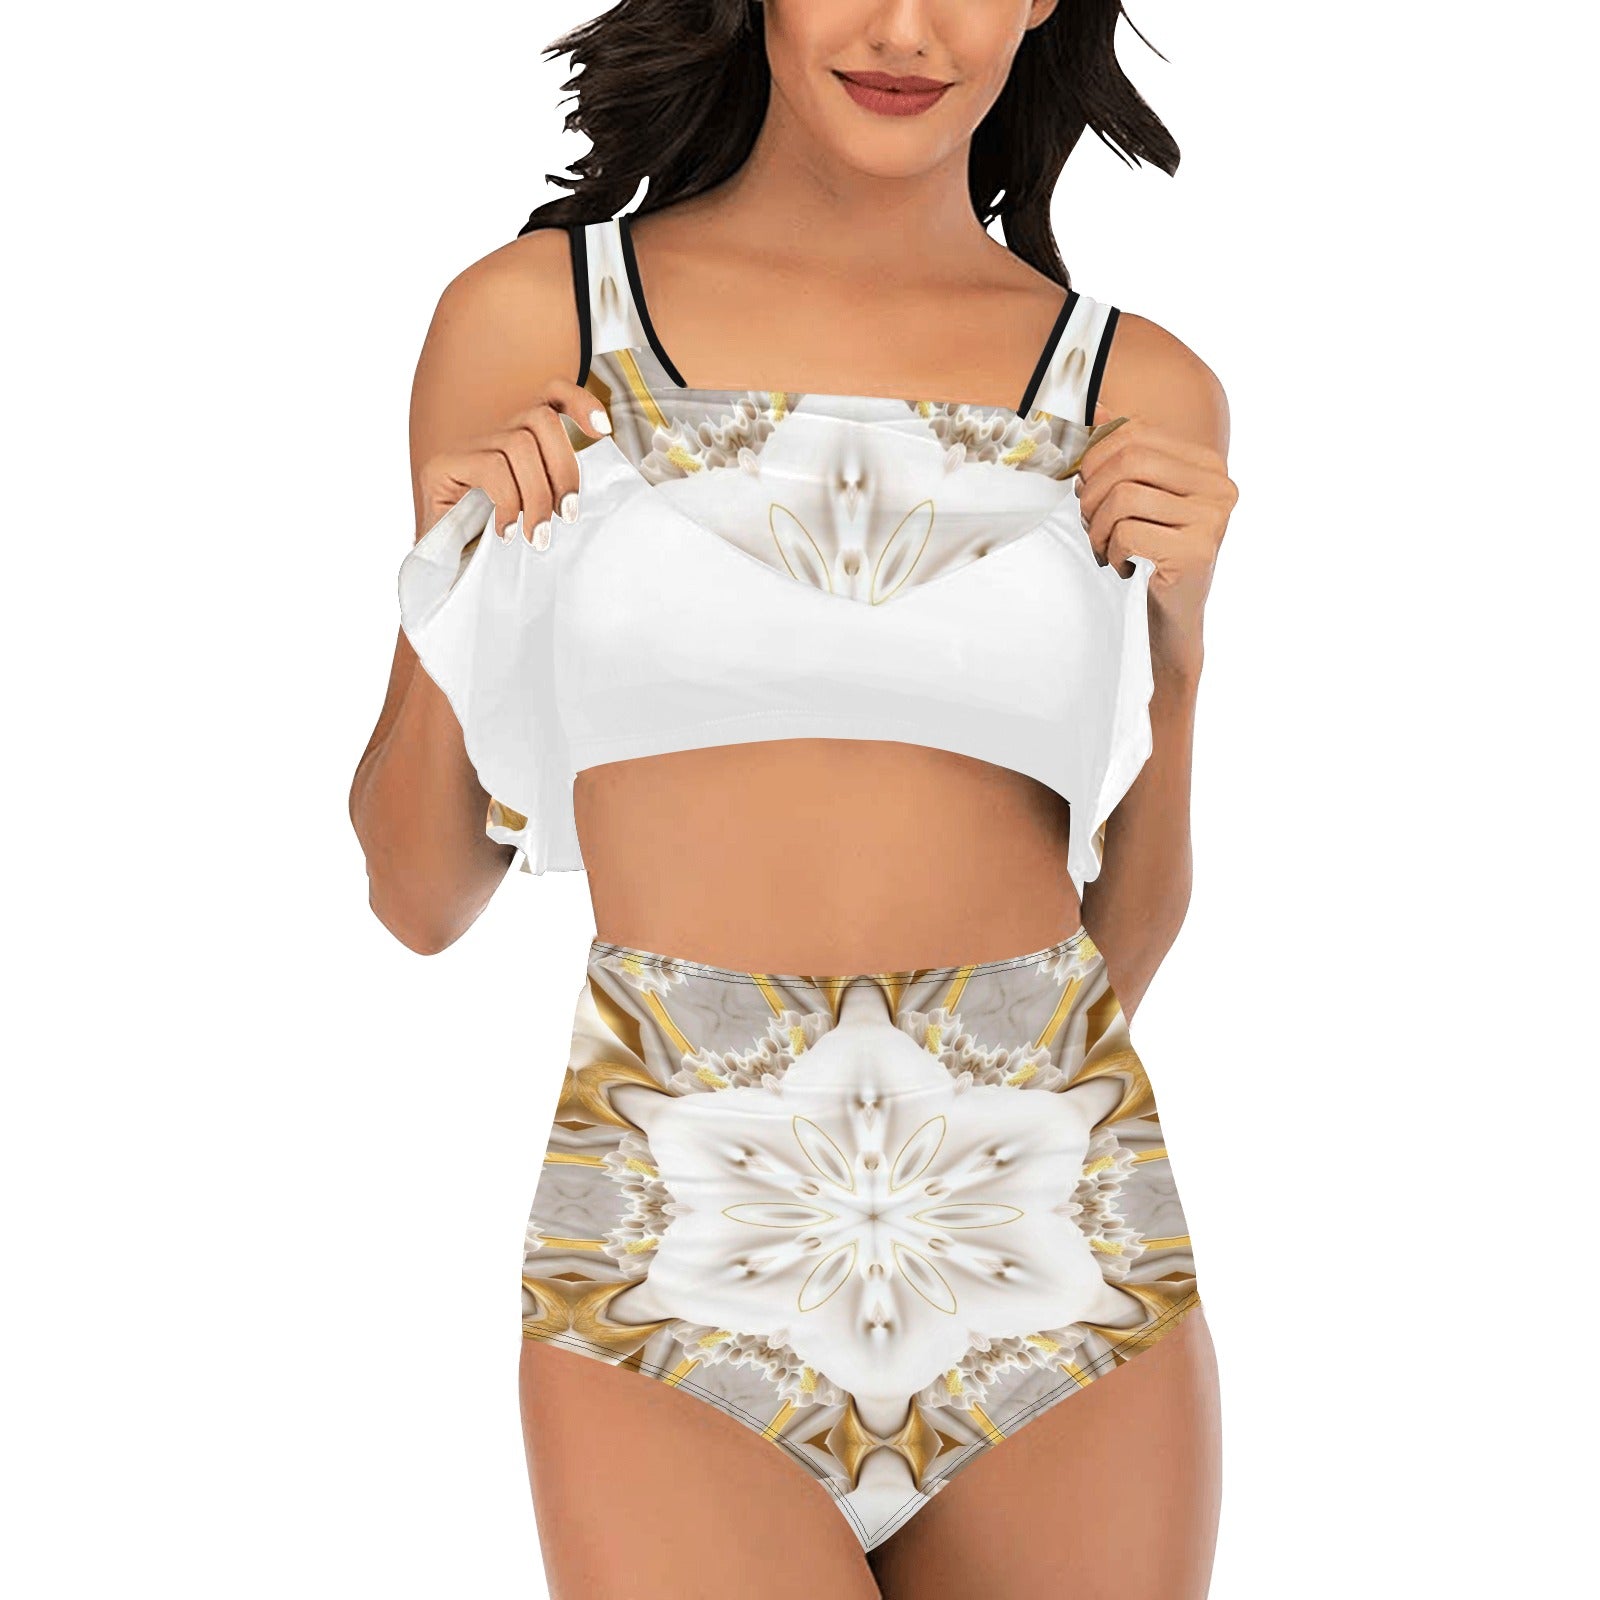 White Flowers with Gold Trim Ruffle Flounce 2-piece Swimsuit